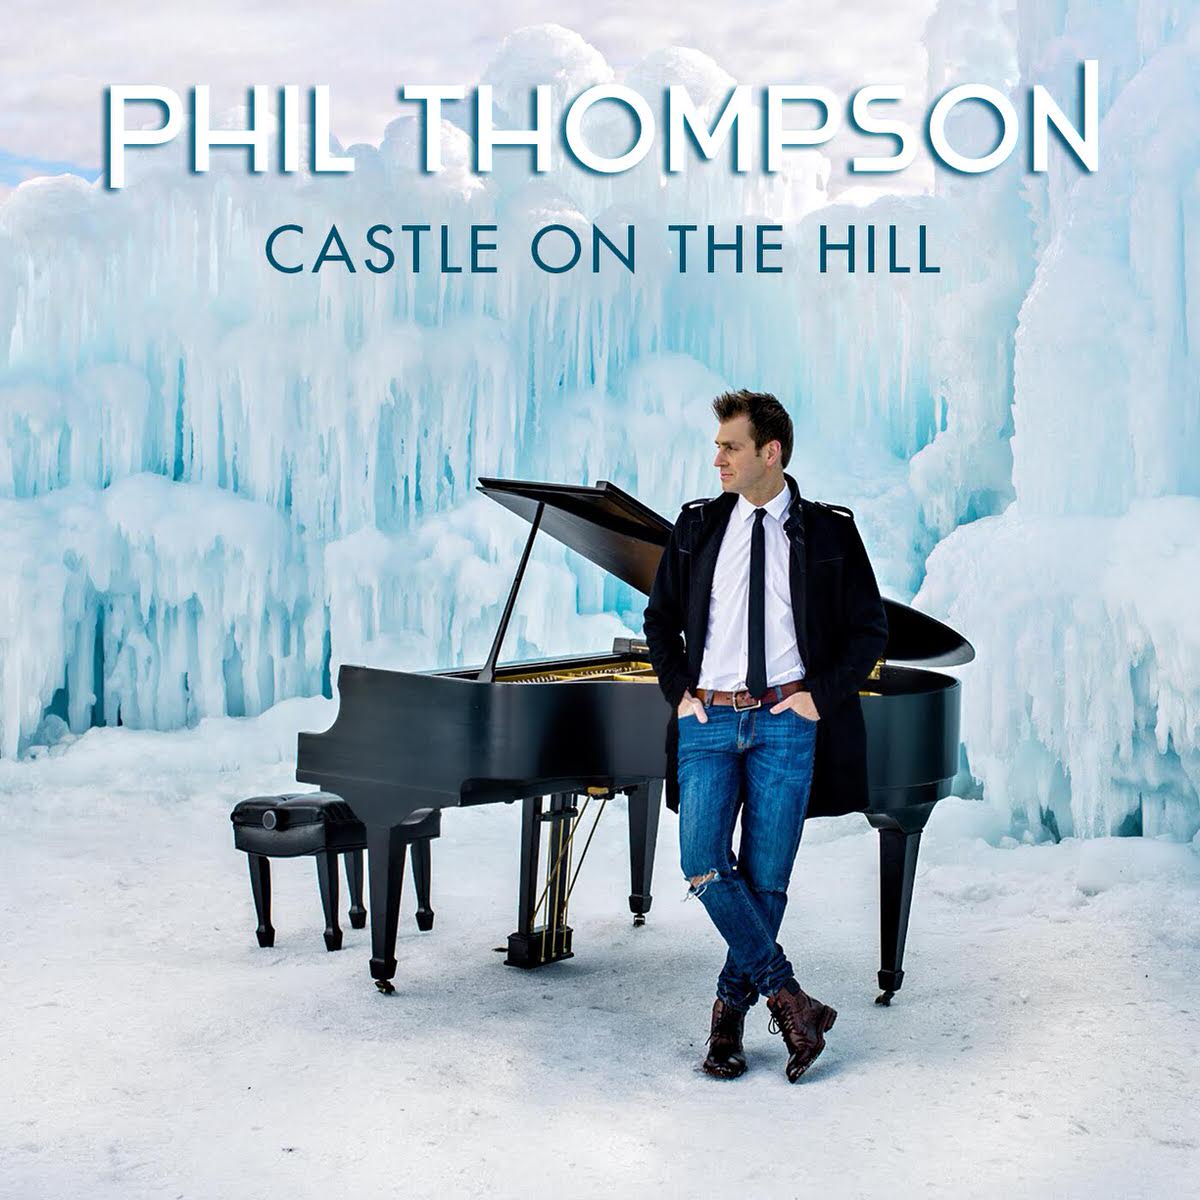 Phil Thompson at Grand Piano in Ice Castle Performing Ed Sheeran's Castle on the Hill